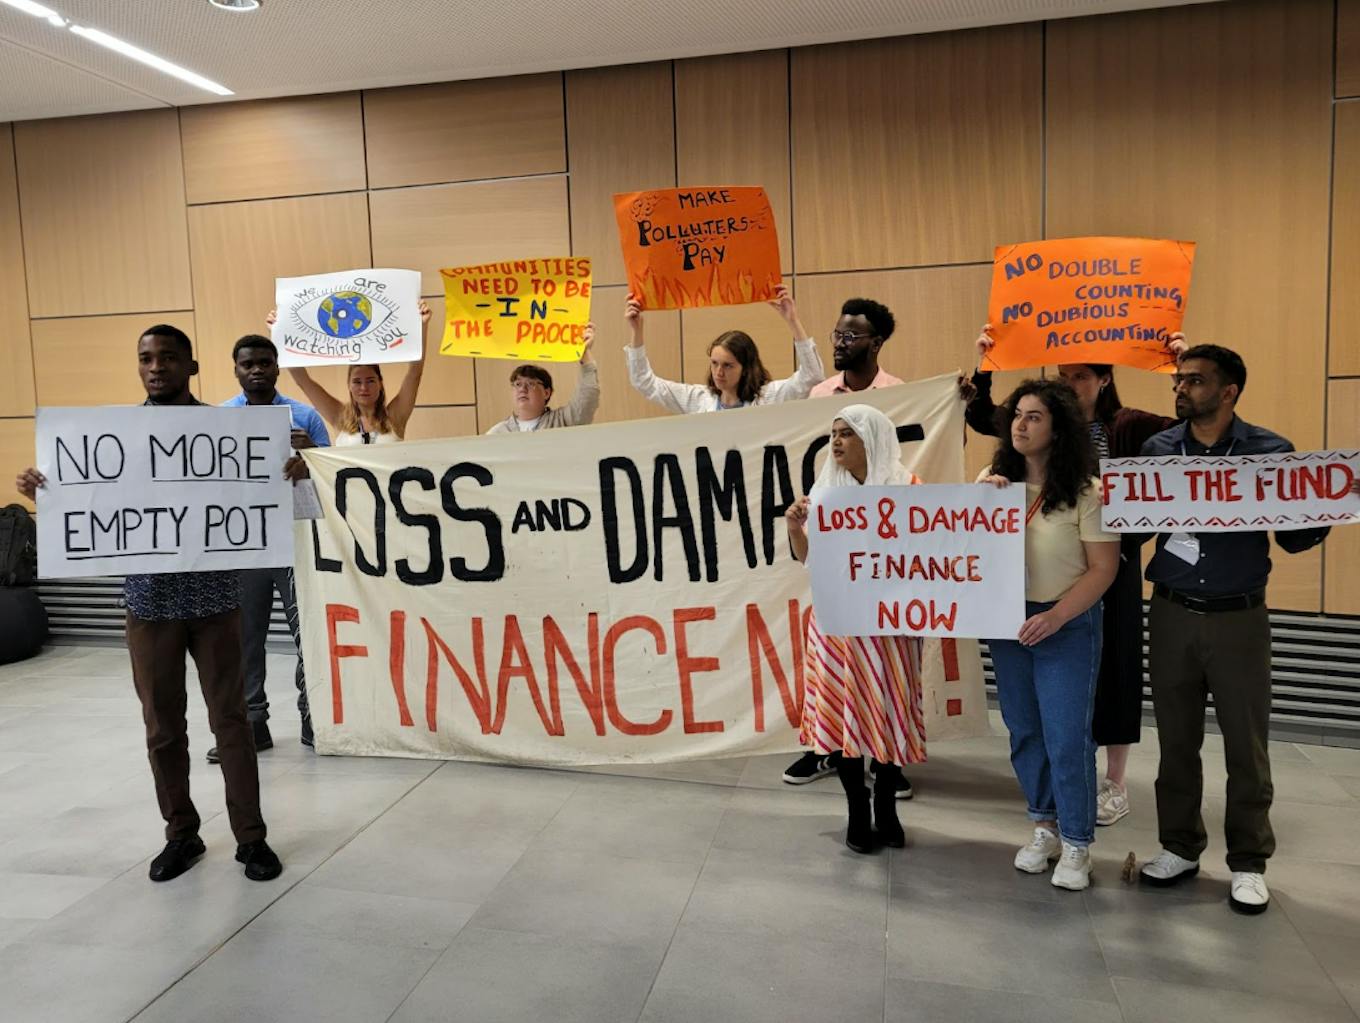 Youth activists call for more urgent Loss and Damage funding. Image: Kate Yeo